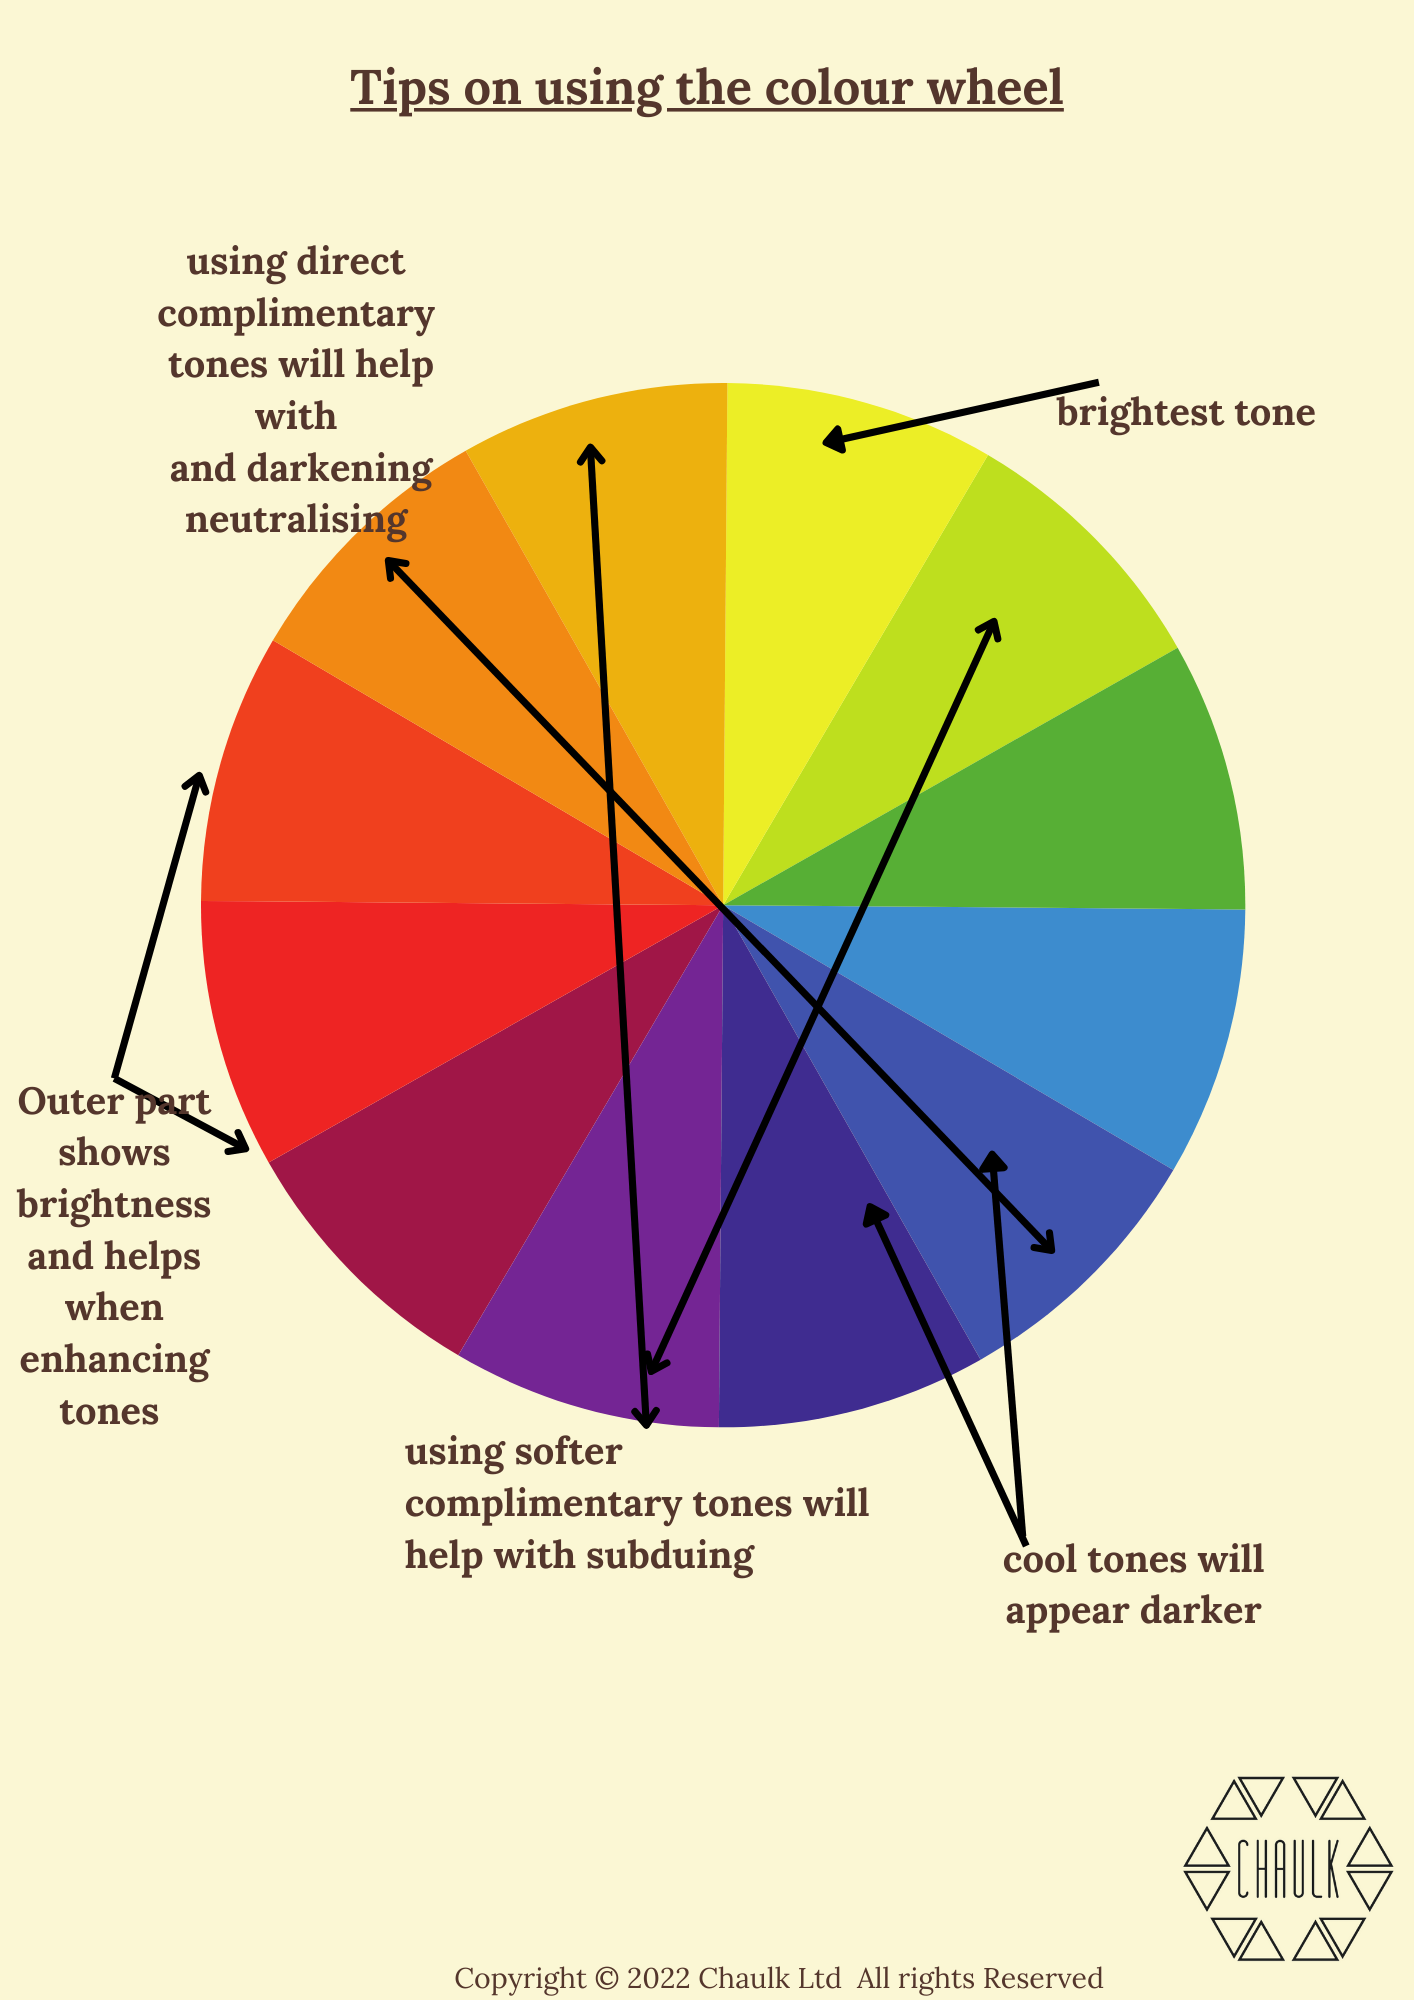 Tips on using the colour wheel in hair colour